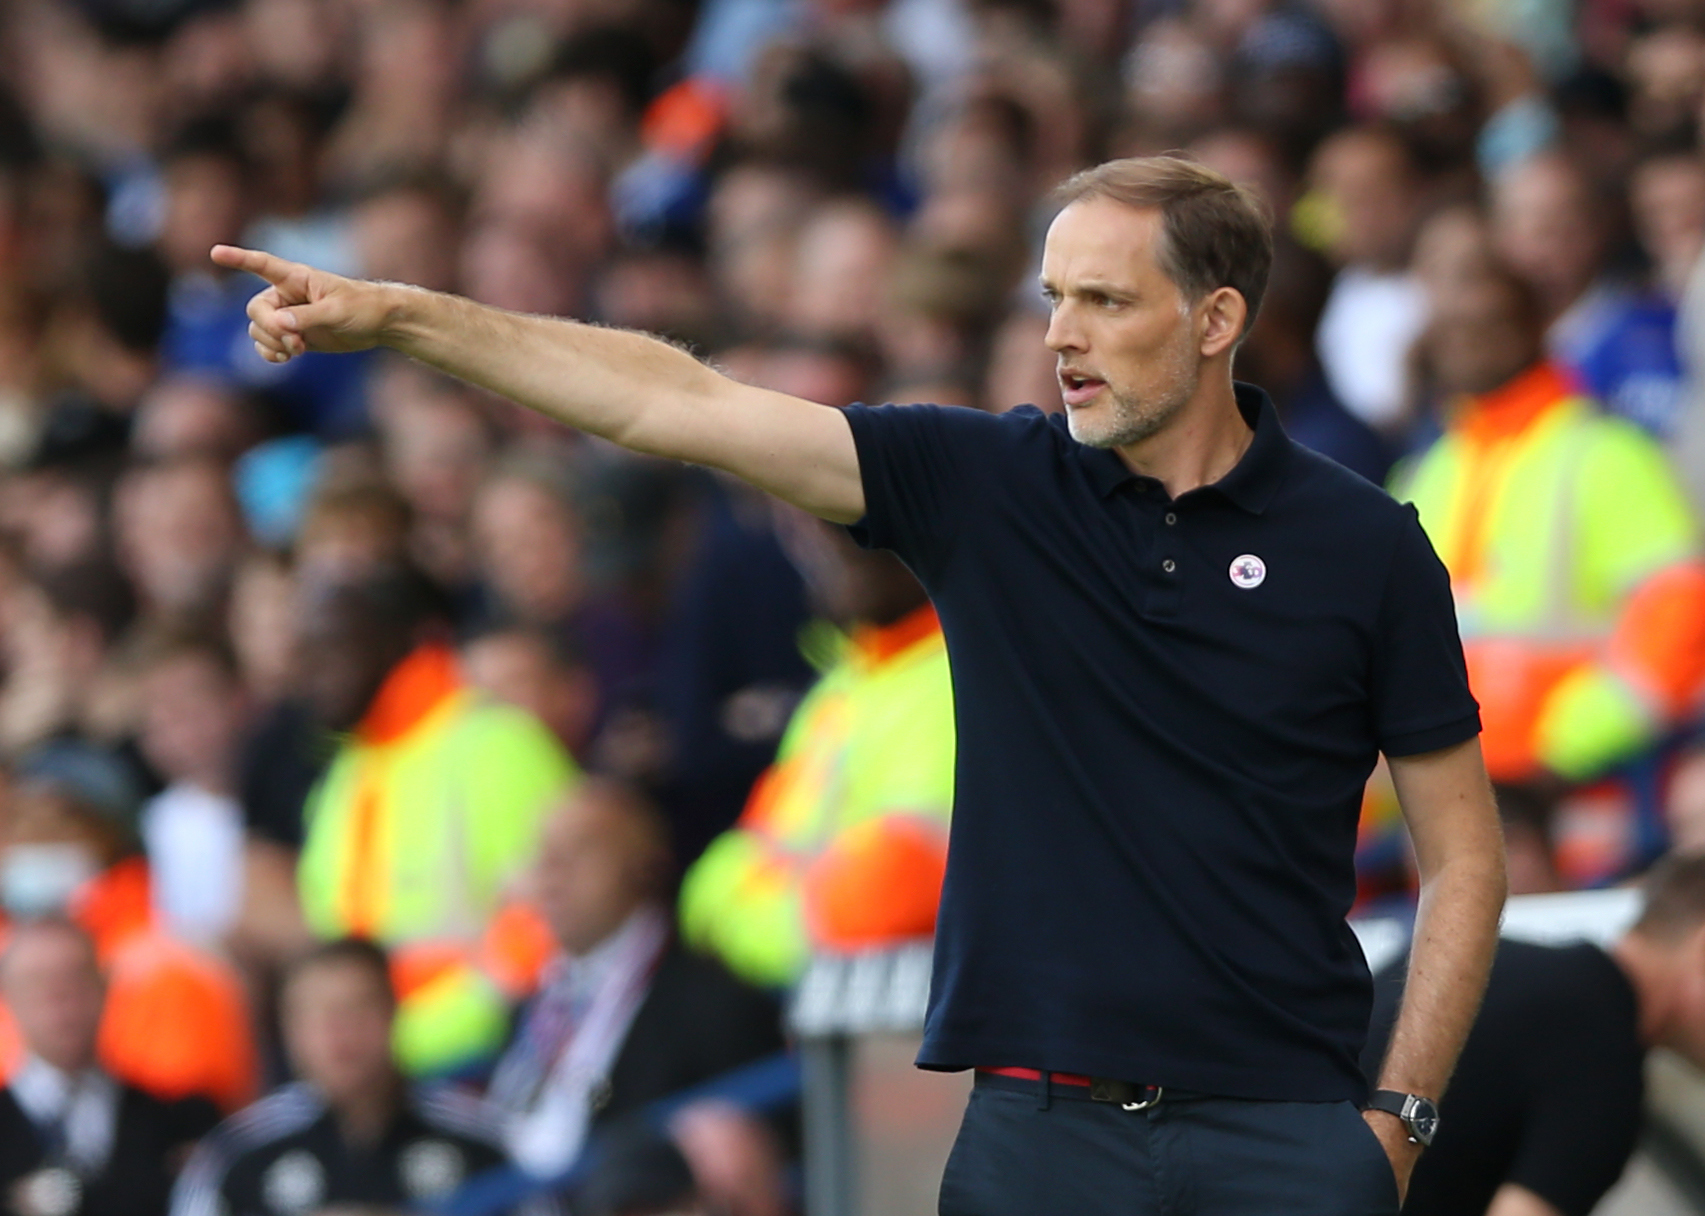 Thomas Tuchel still wants more Chelsea signings before window closes